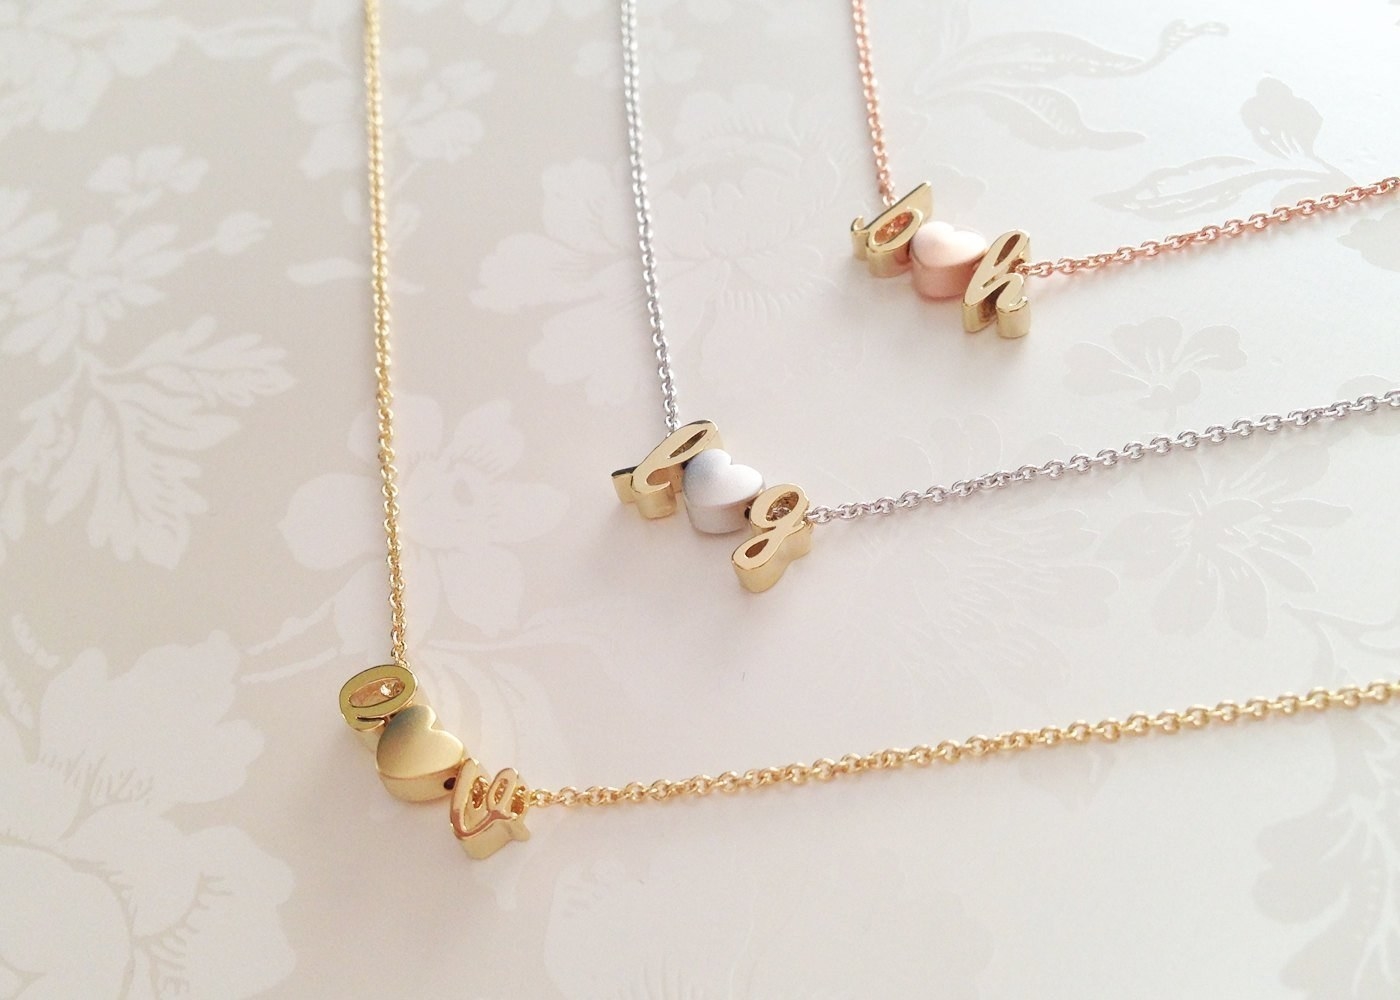 30 Simple Yet Chic Necklaces You Should Have - Fancy Ideas about Everything